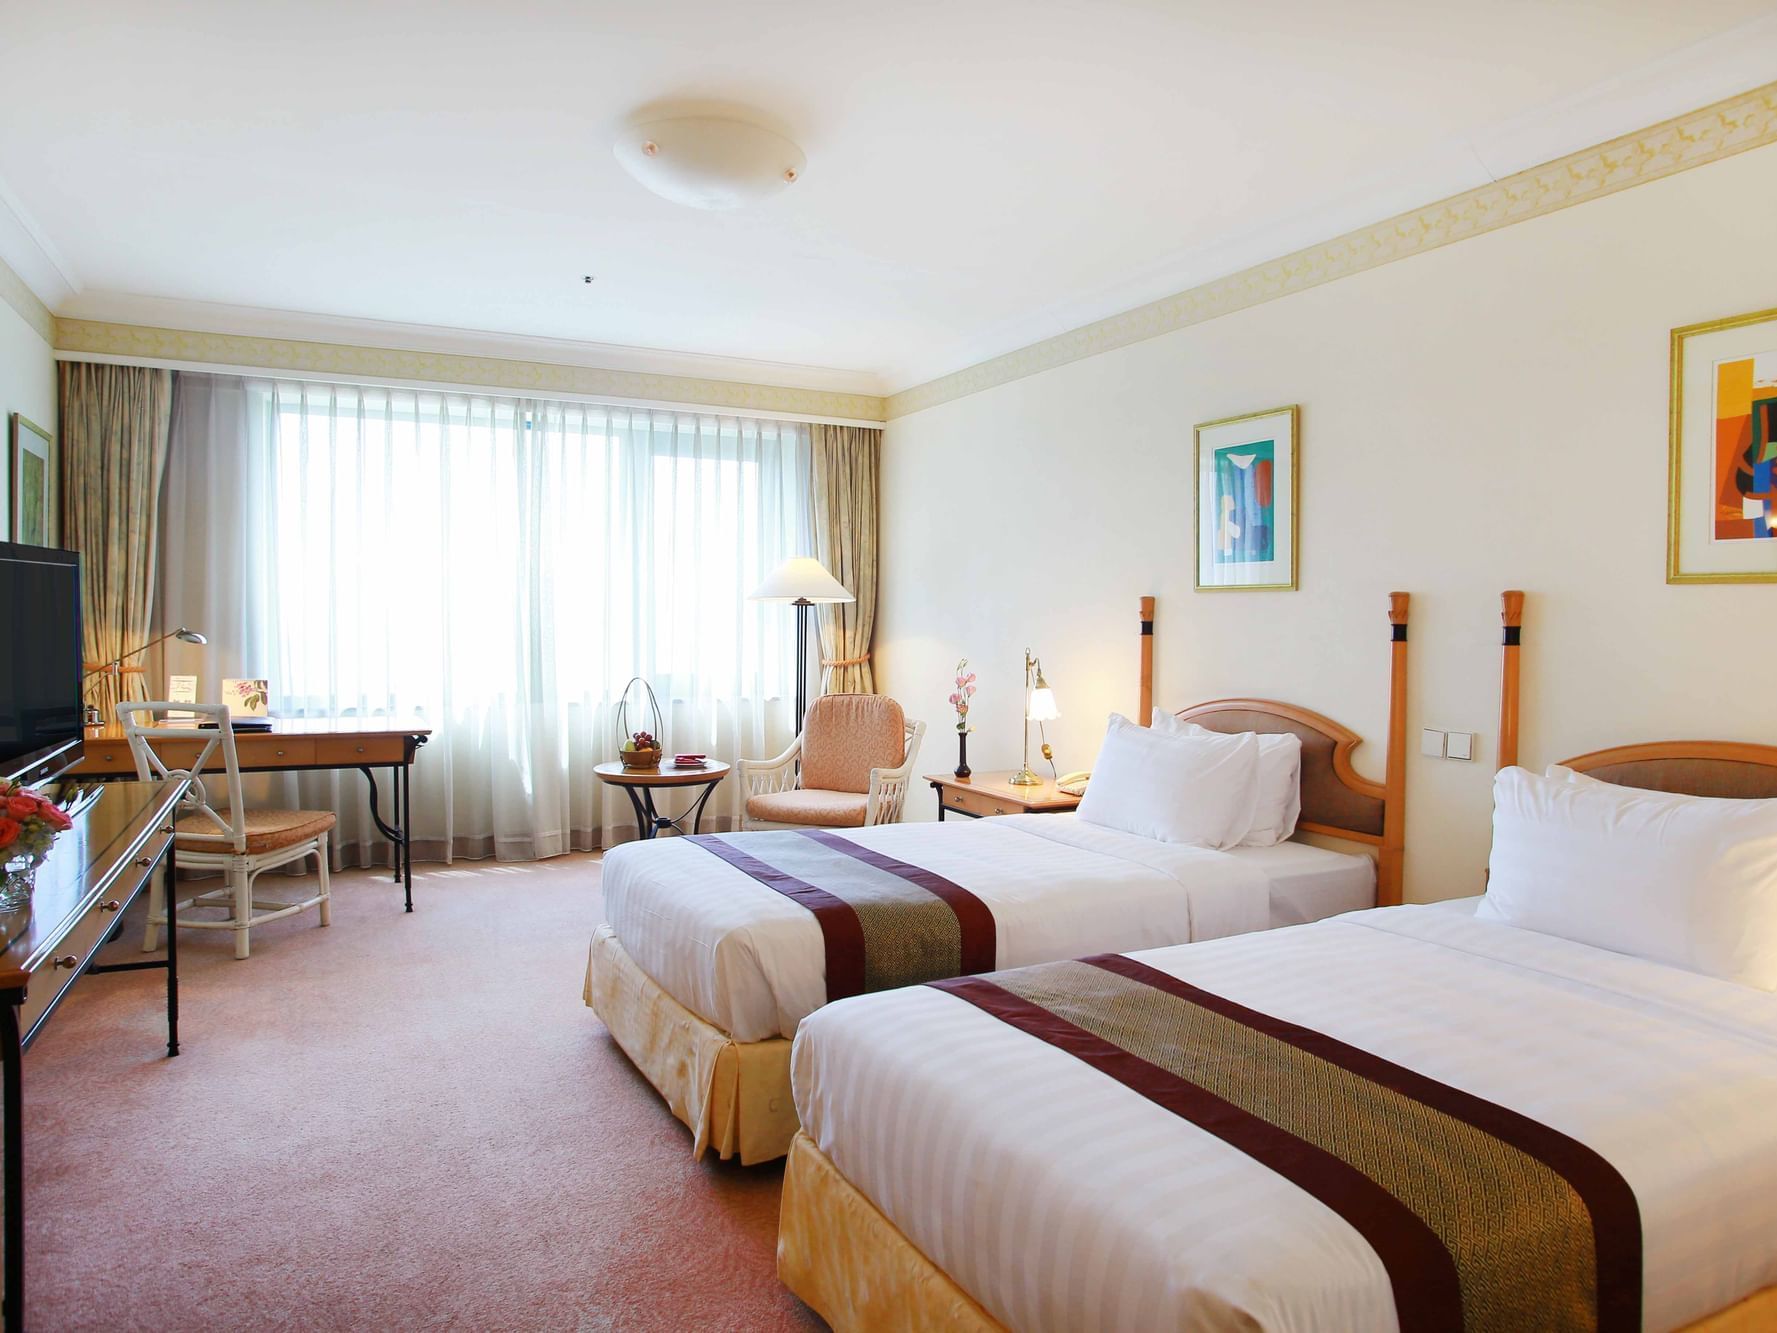 Deluxe Room with two beds & working desk at Hanoi Daewoo Hotel